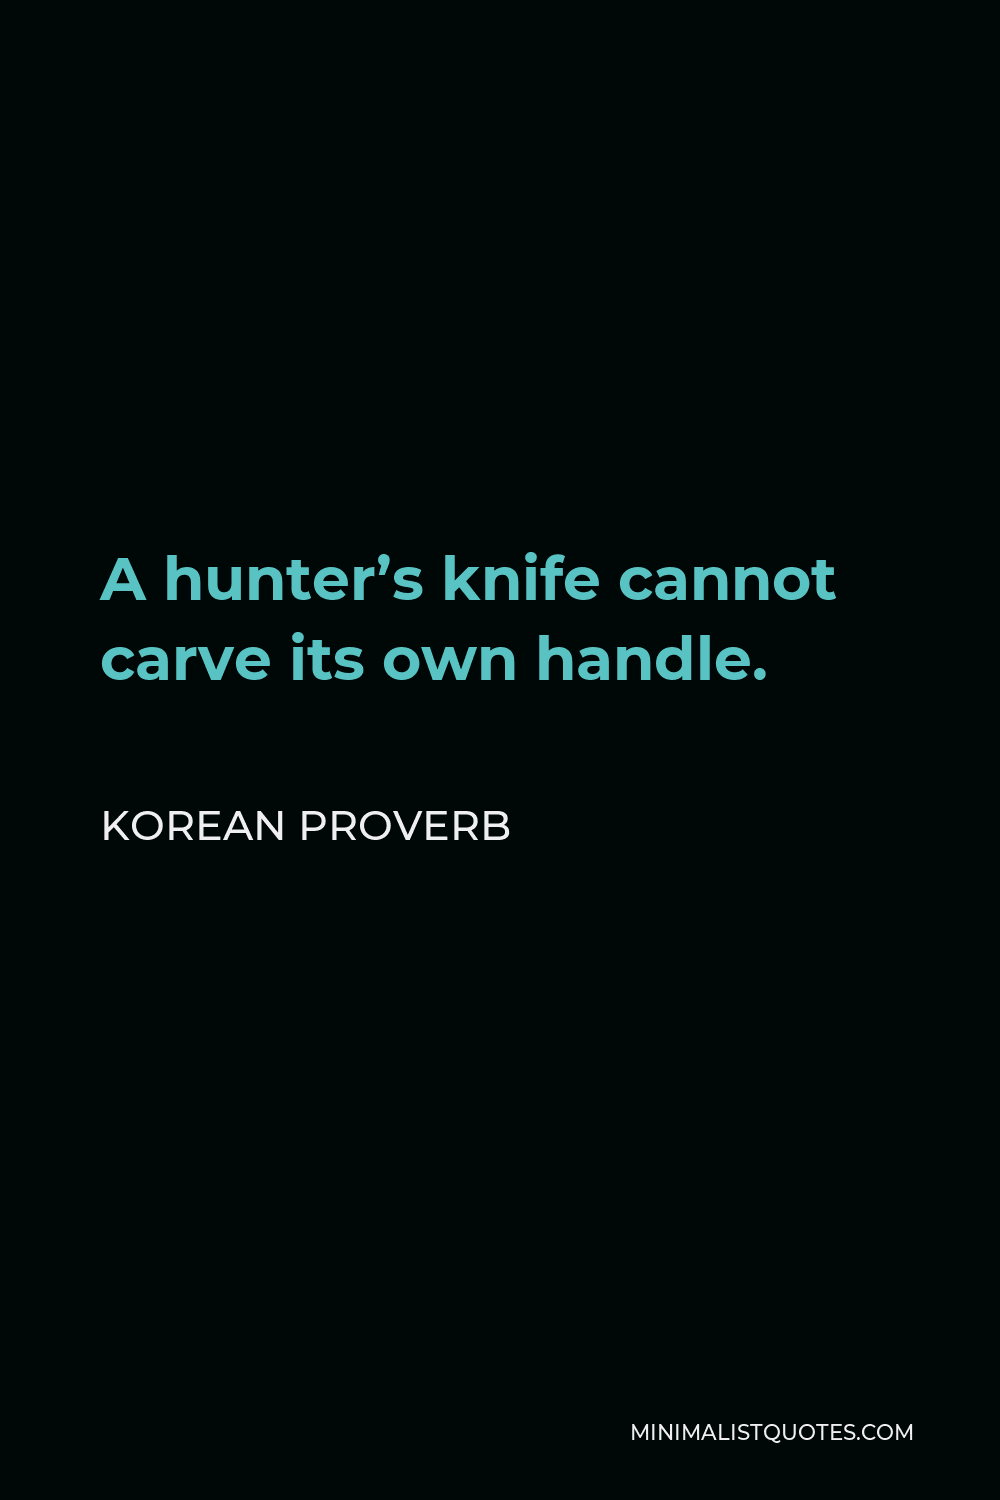 Korean Proverb Quote - A hunter’s knife cannot carve its own handle.